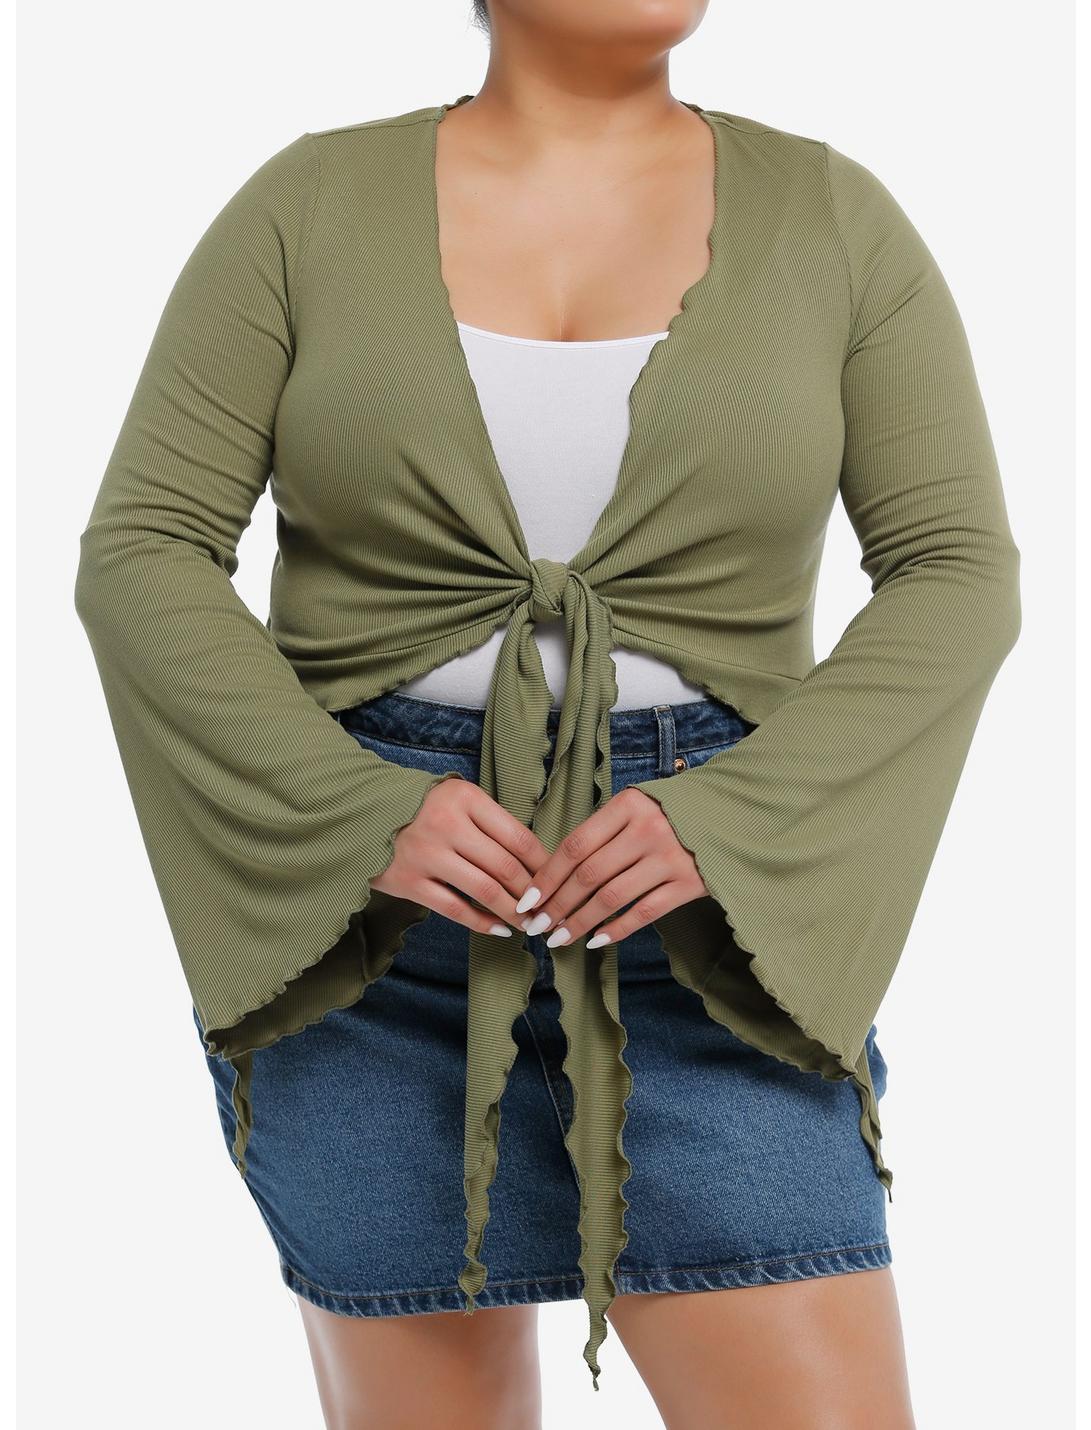 Thorn & Fable Green Tie-Front Girls Bell-Sleeve Crop Top Plus Size, OLIVE, hi-res